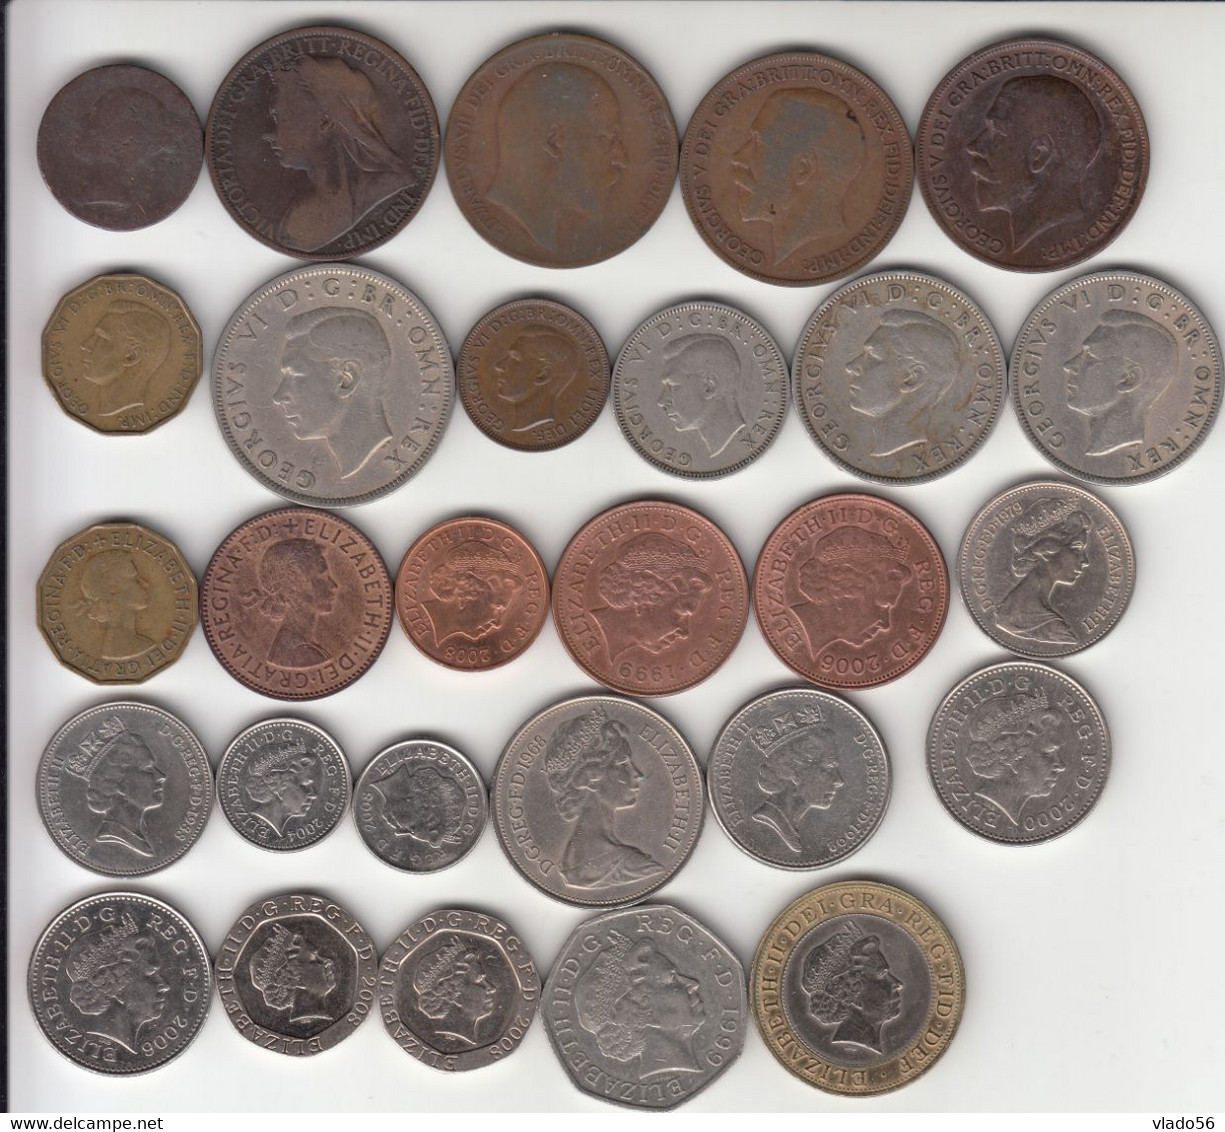 GREAT BRITAIN  - LOT 27 DIFFERENT COINS FROM  1 FARTHING 1847 UP TO  2 POUNDS 2008 ,  LM1.23 - Collezioni